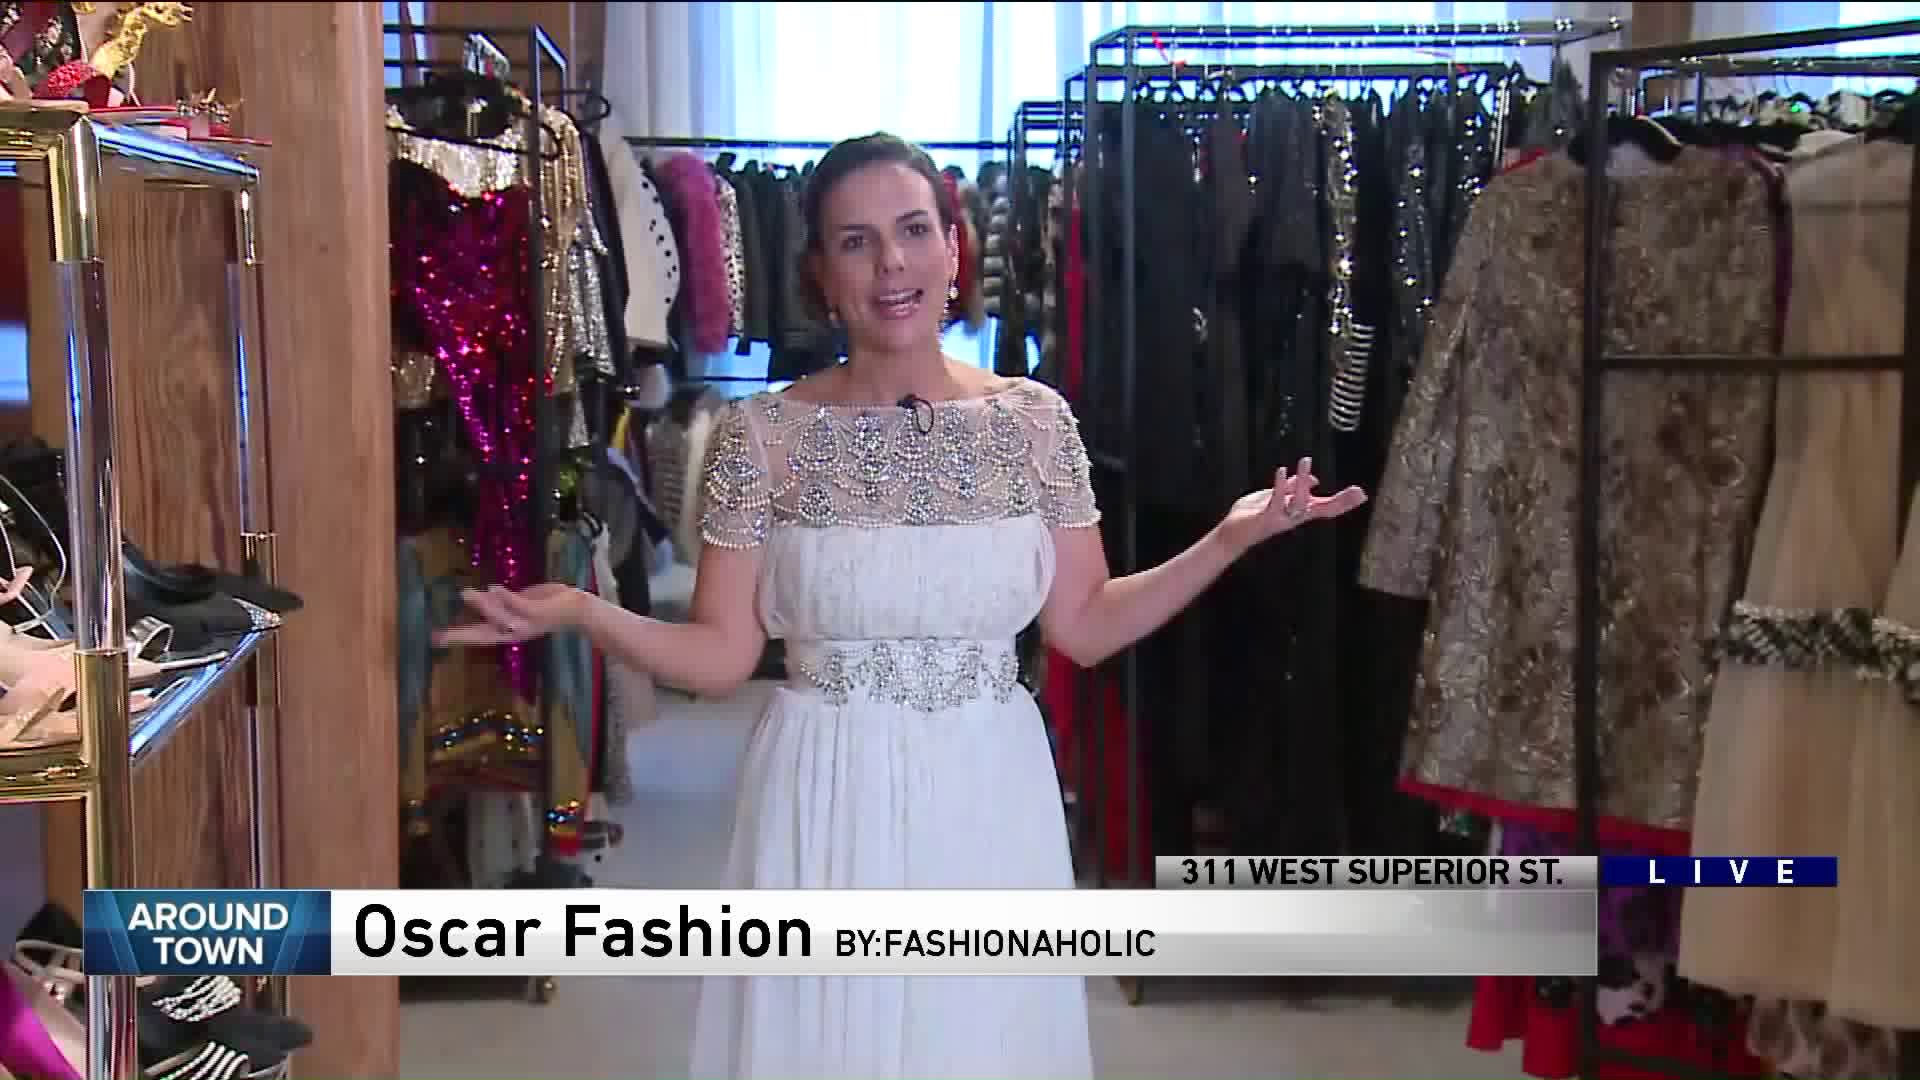 Around Town dresses up to talk Oscars fashion at By:Fashionaholic